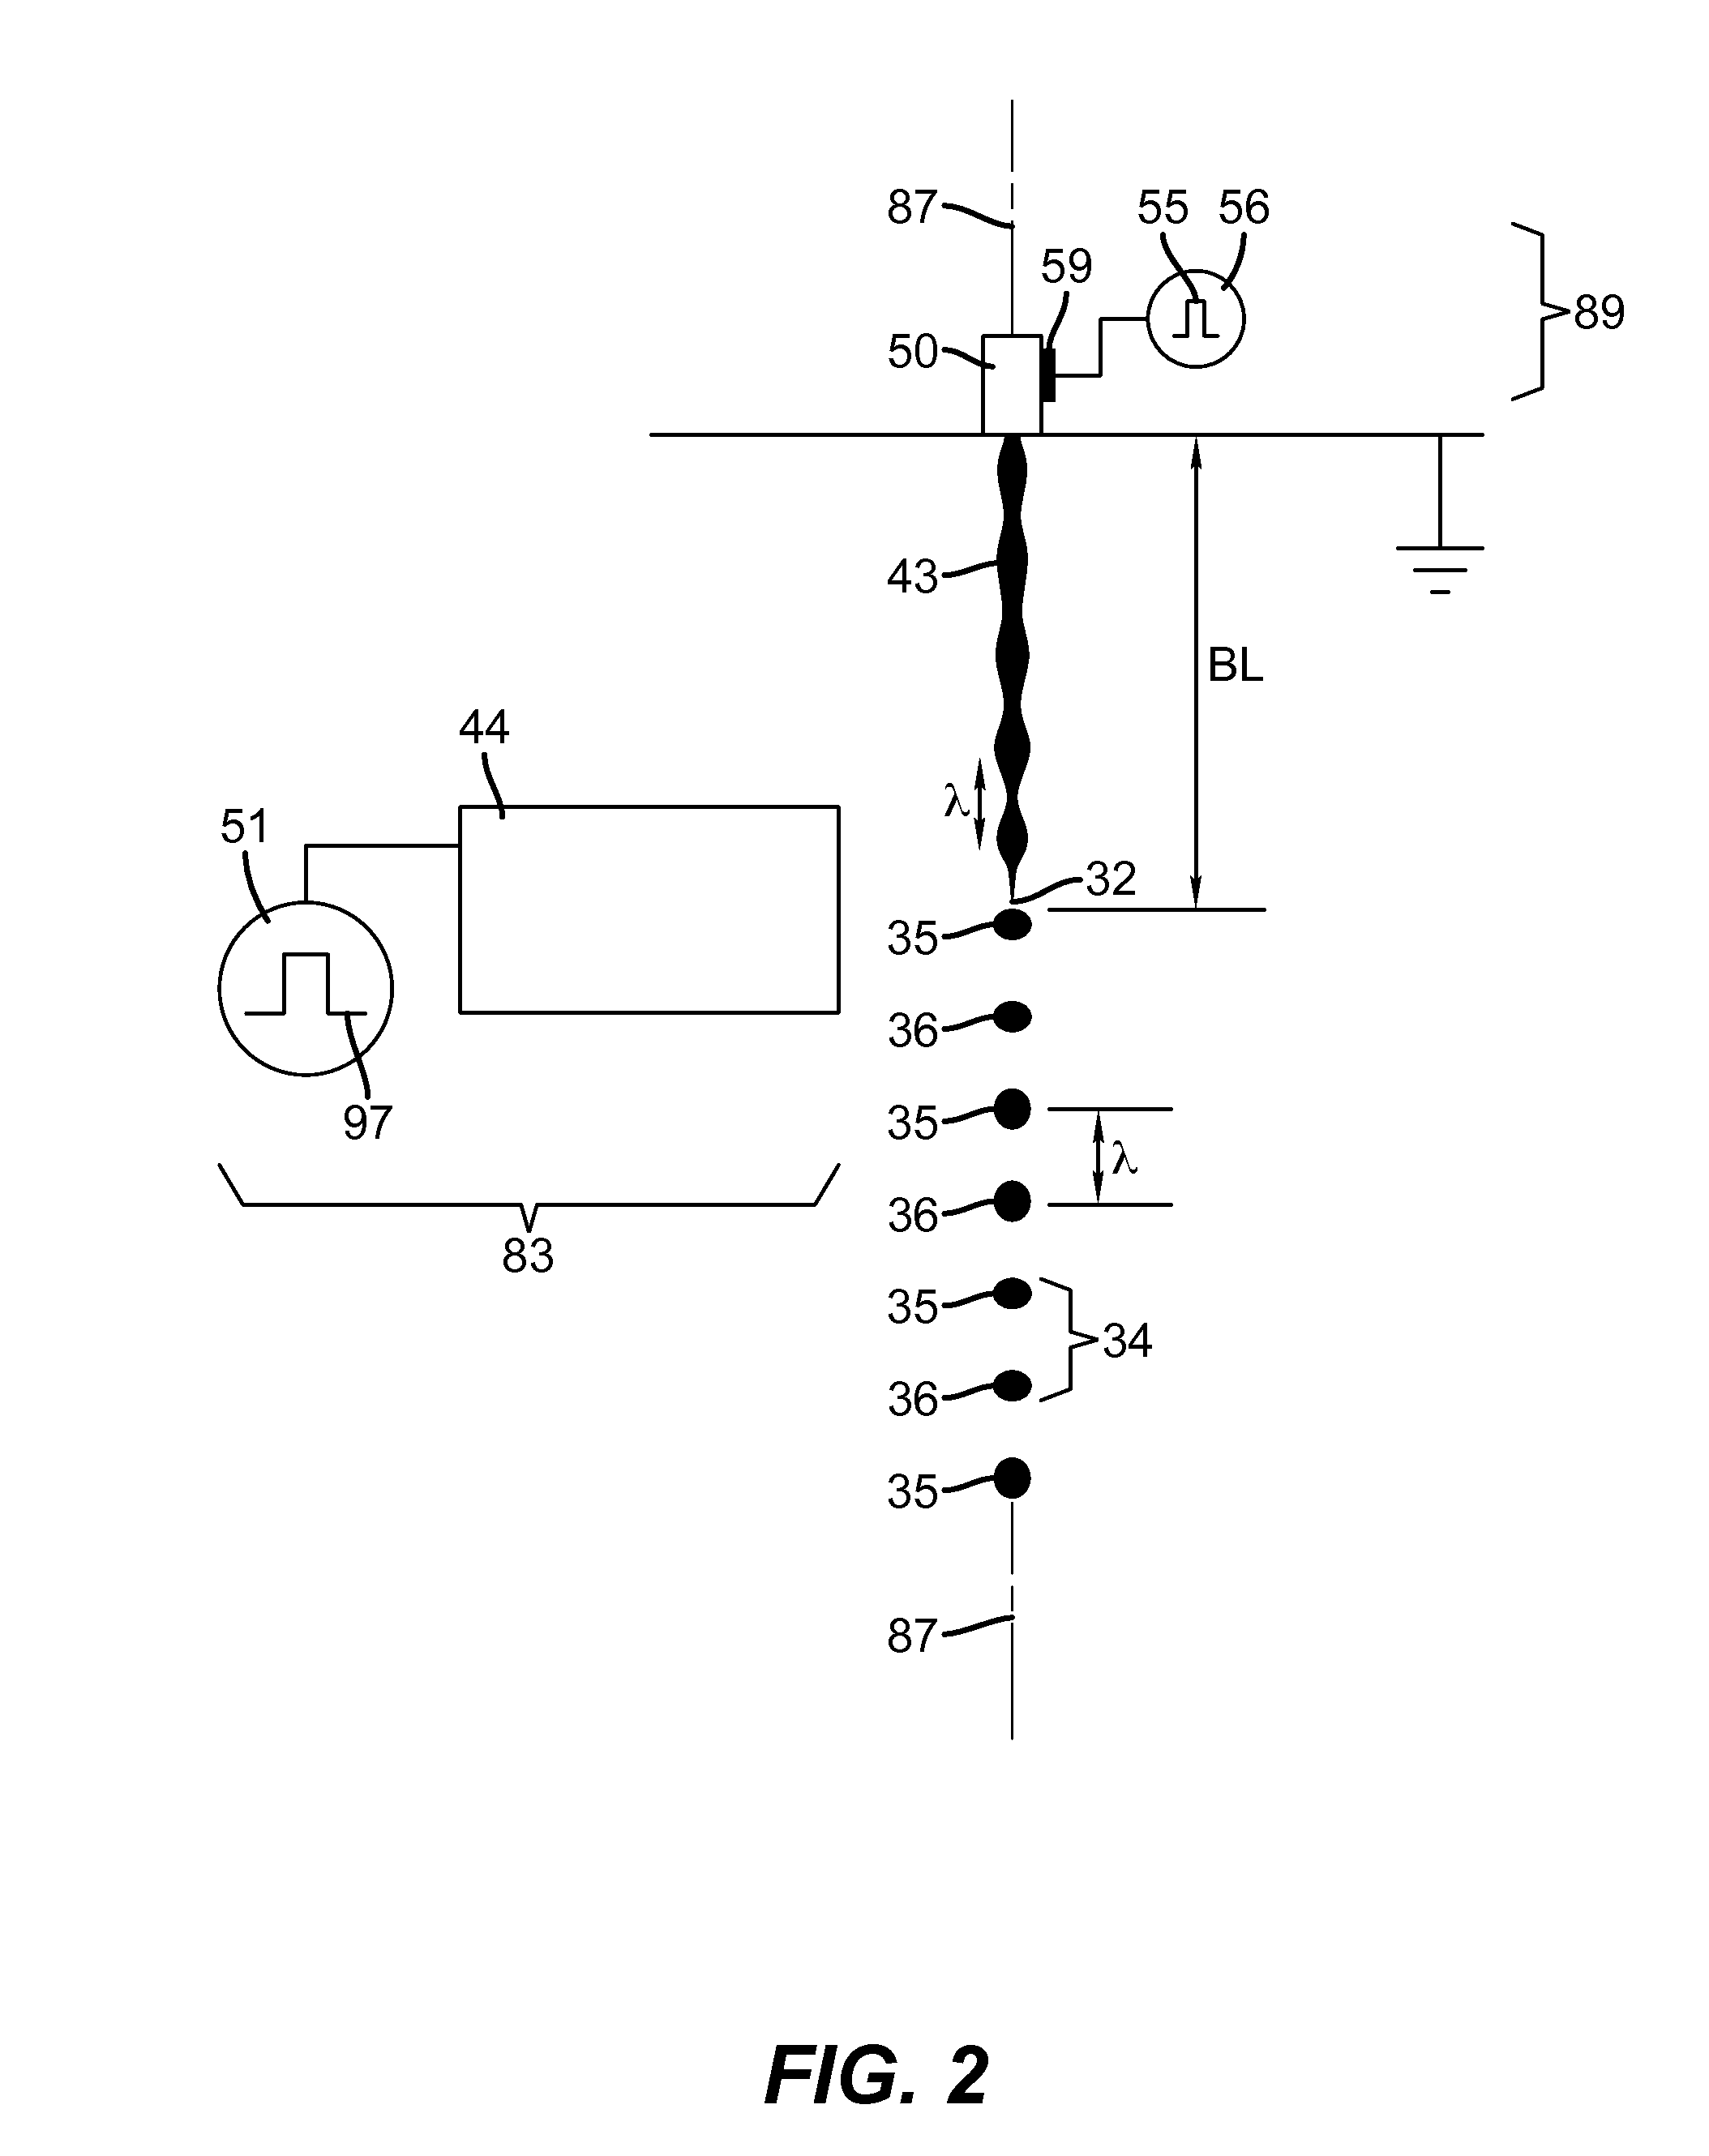 Ejecting liquid using drop charge and mass